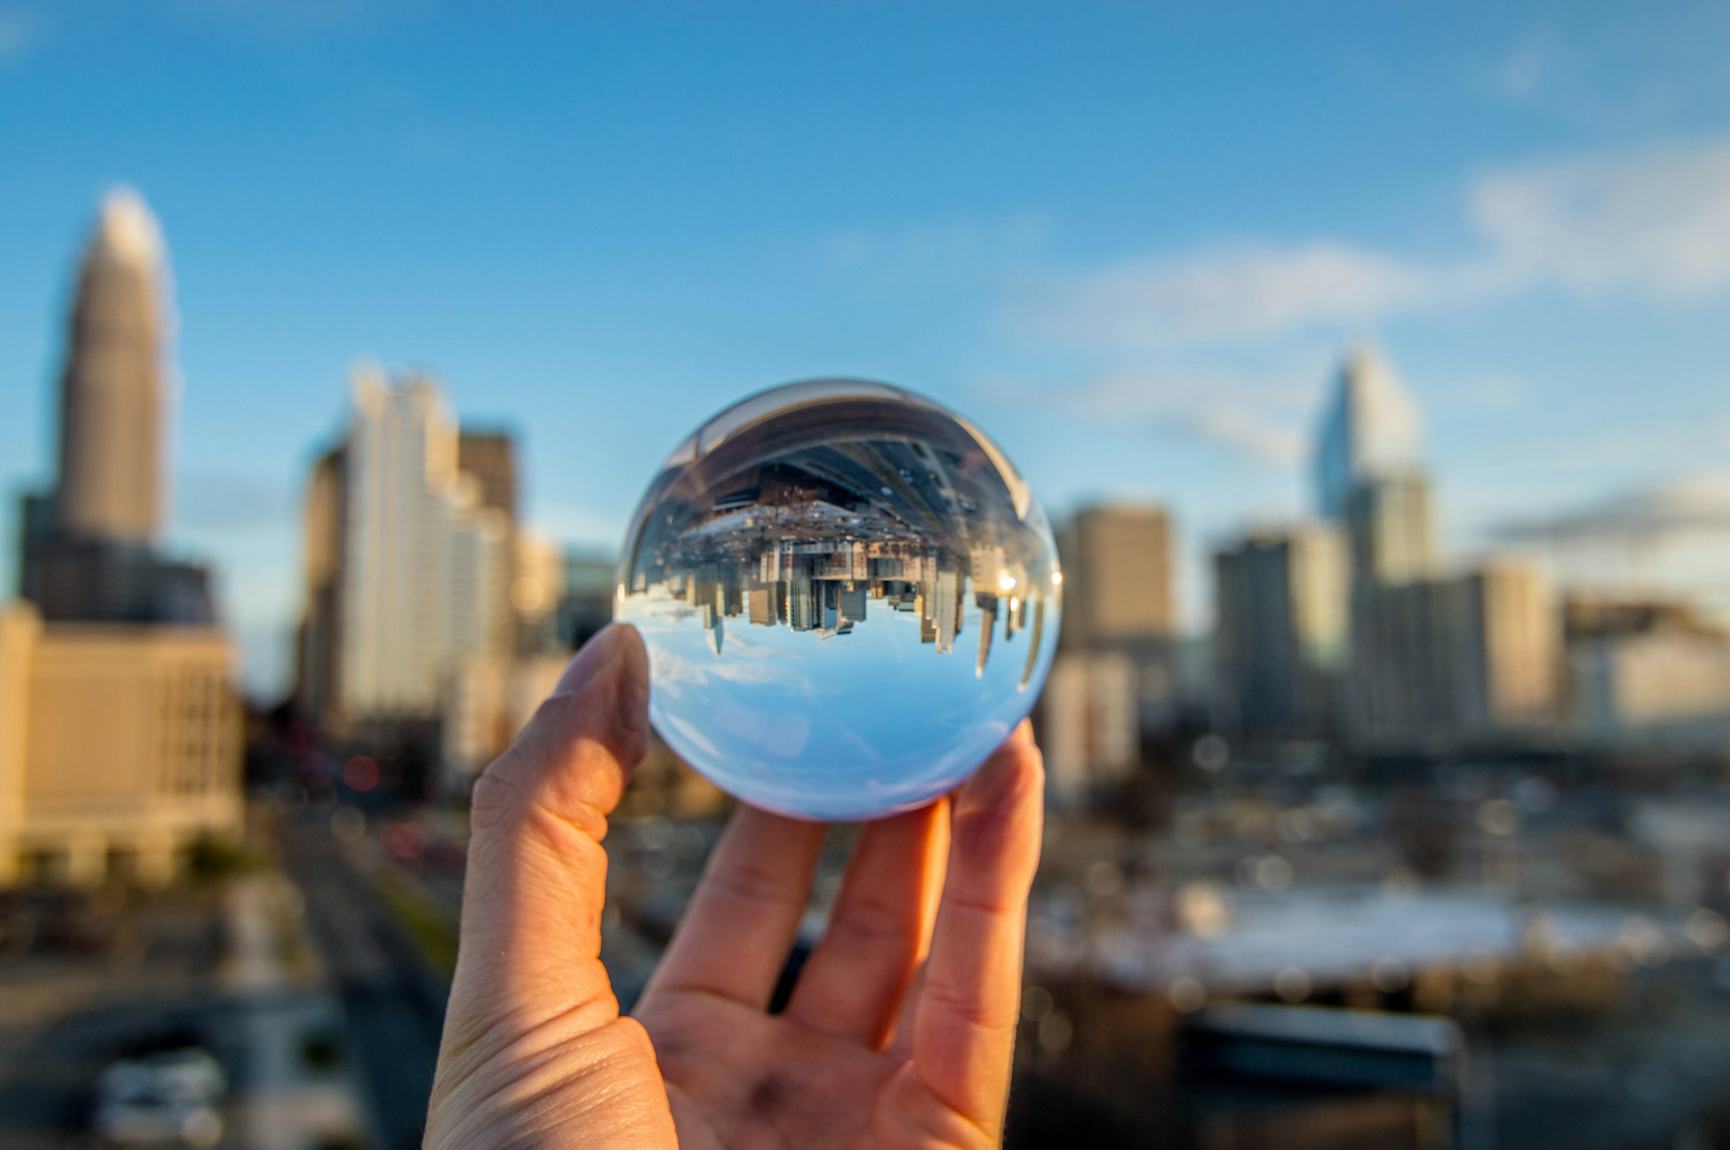 Hand holding a glass ball up to a city skyline